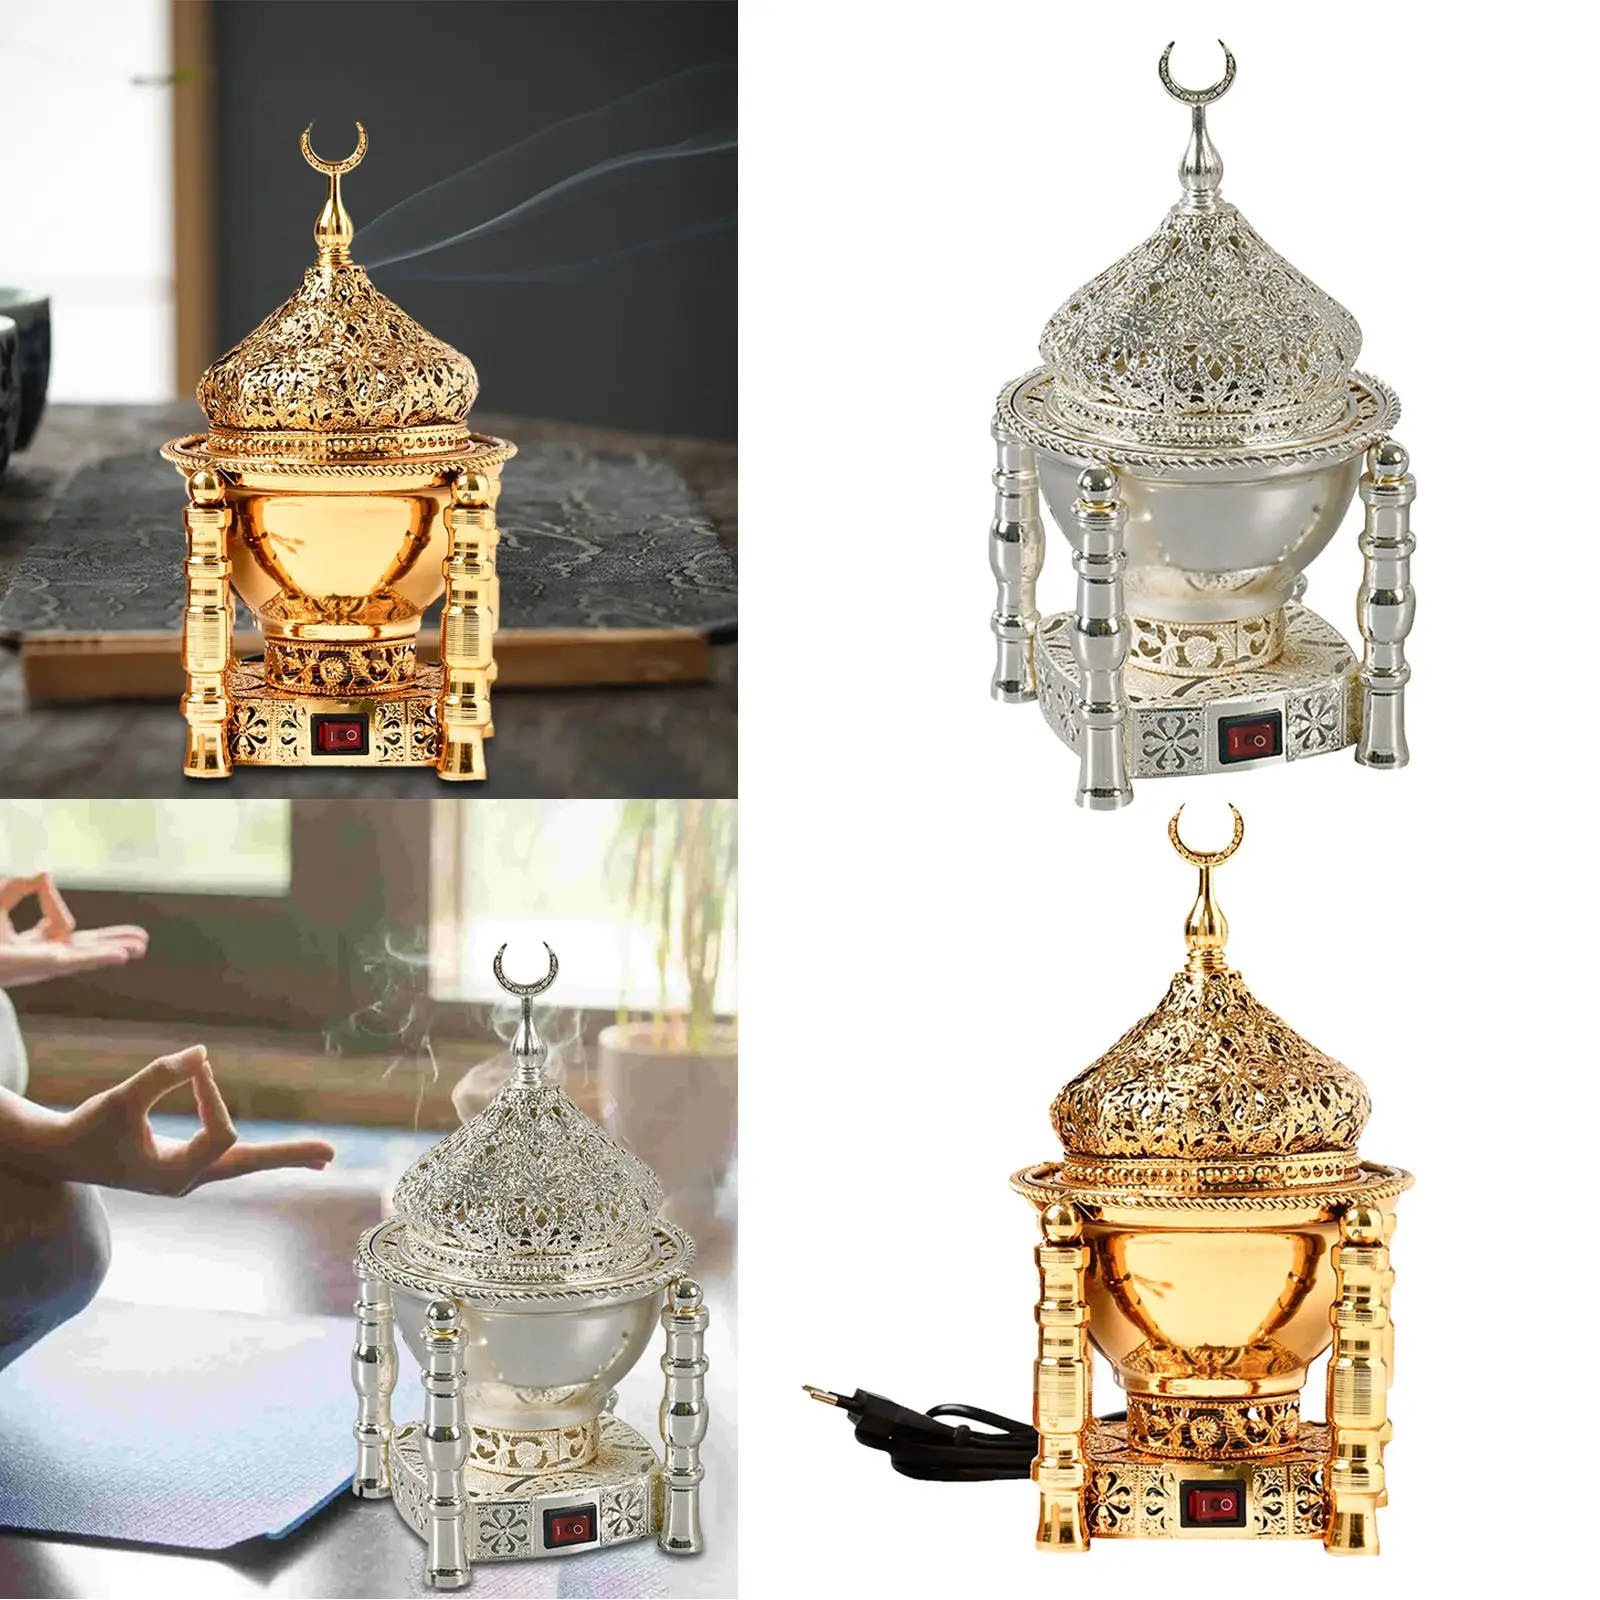 Electric Arabian Incense Diffuser Metal Gift Accessories Fragrance for Bedroom SPA Meditation Home Decor Office